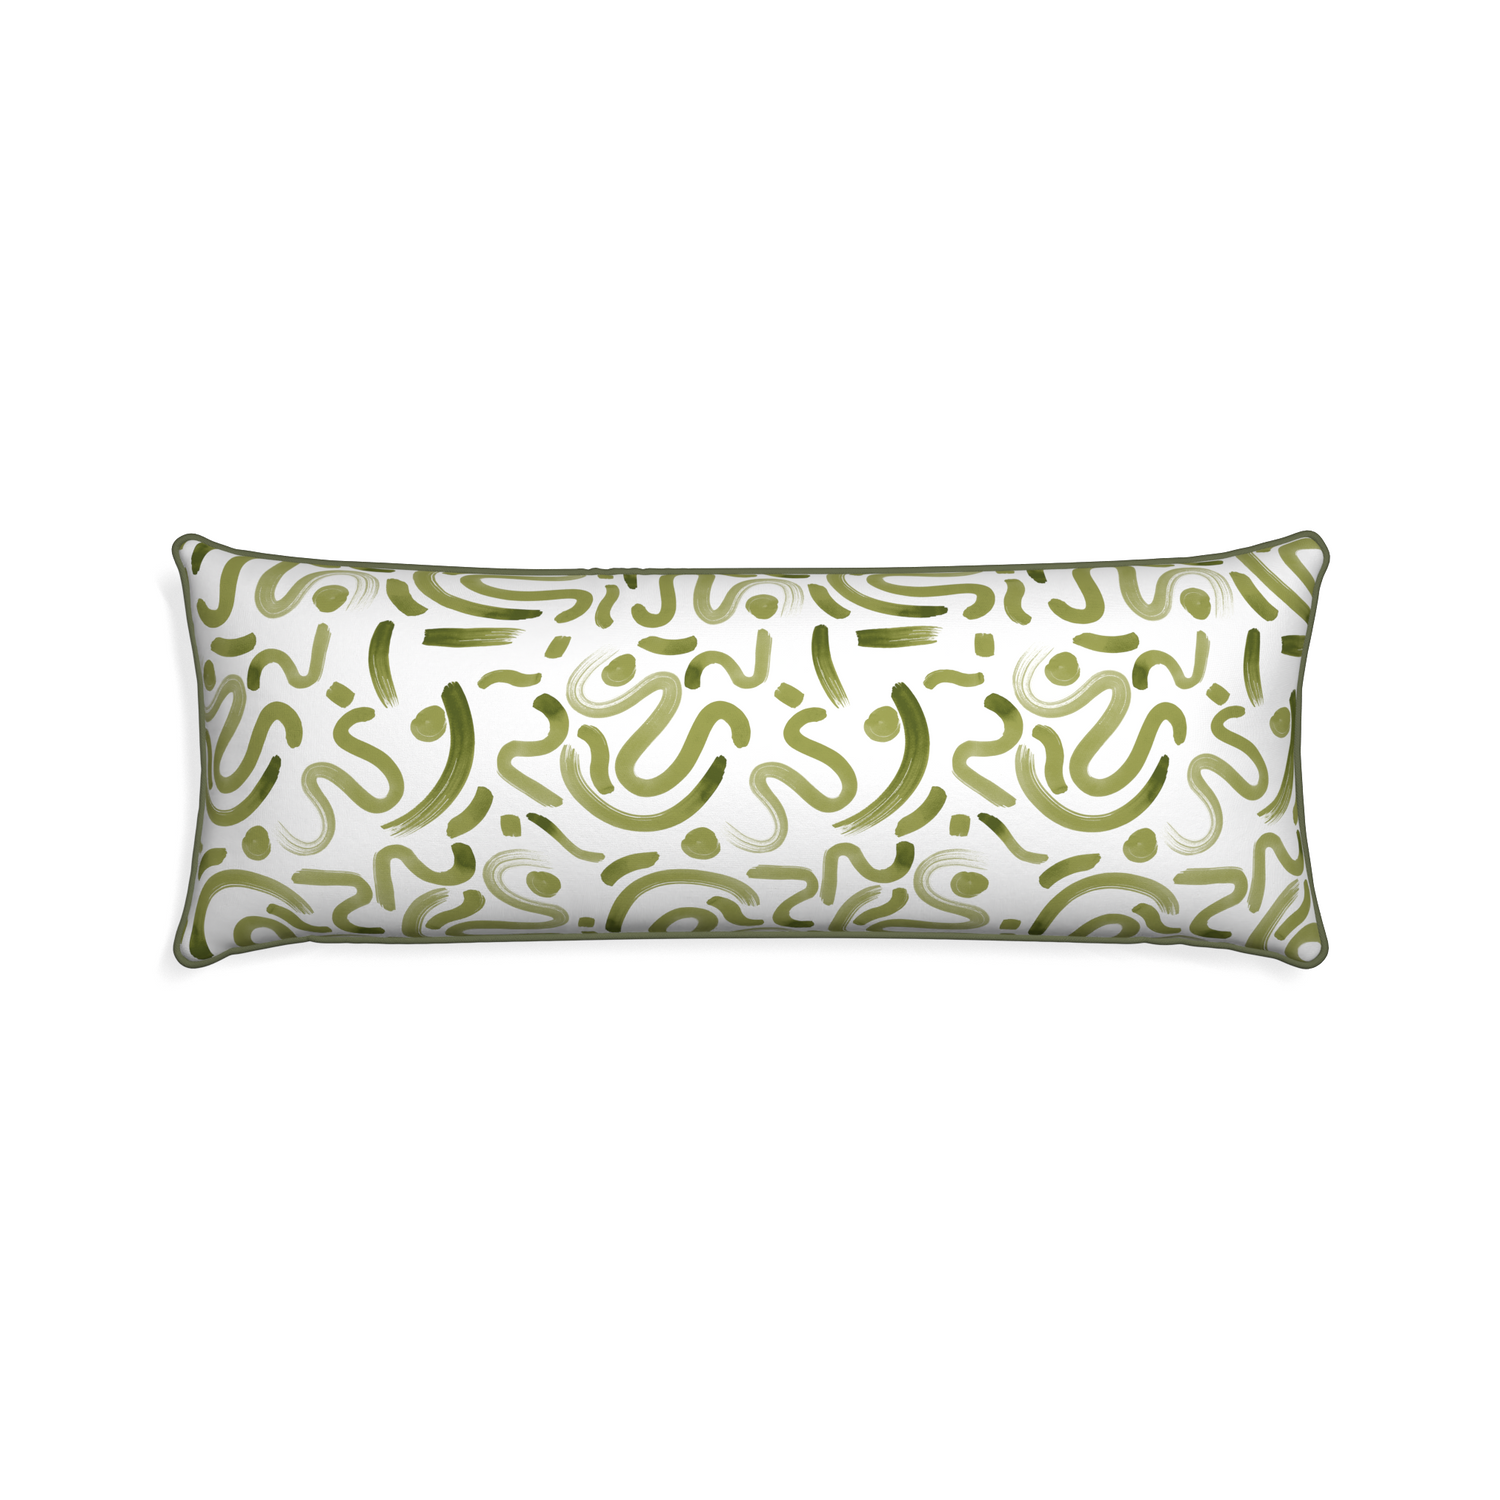 Xl-lumbar hockney moss custom pillow with f piping on white background